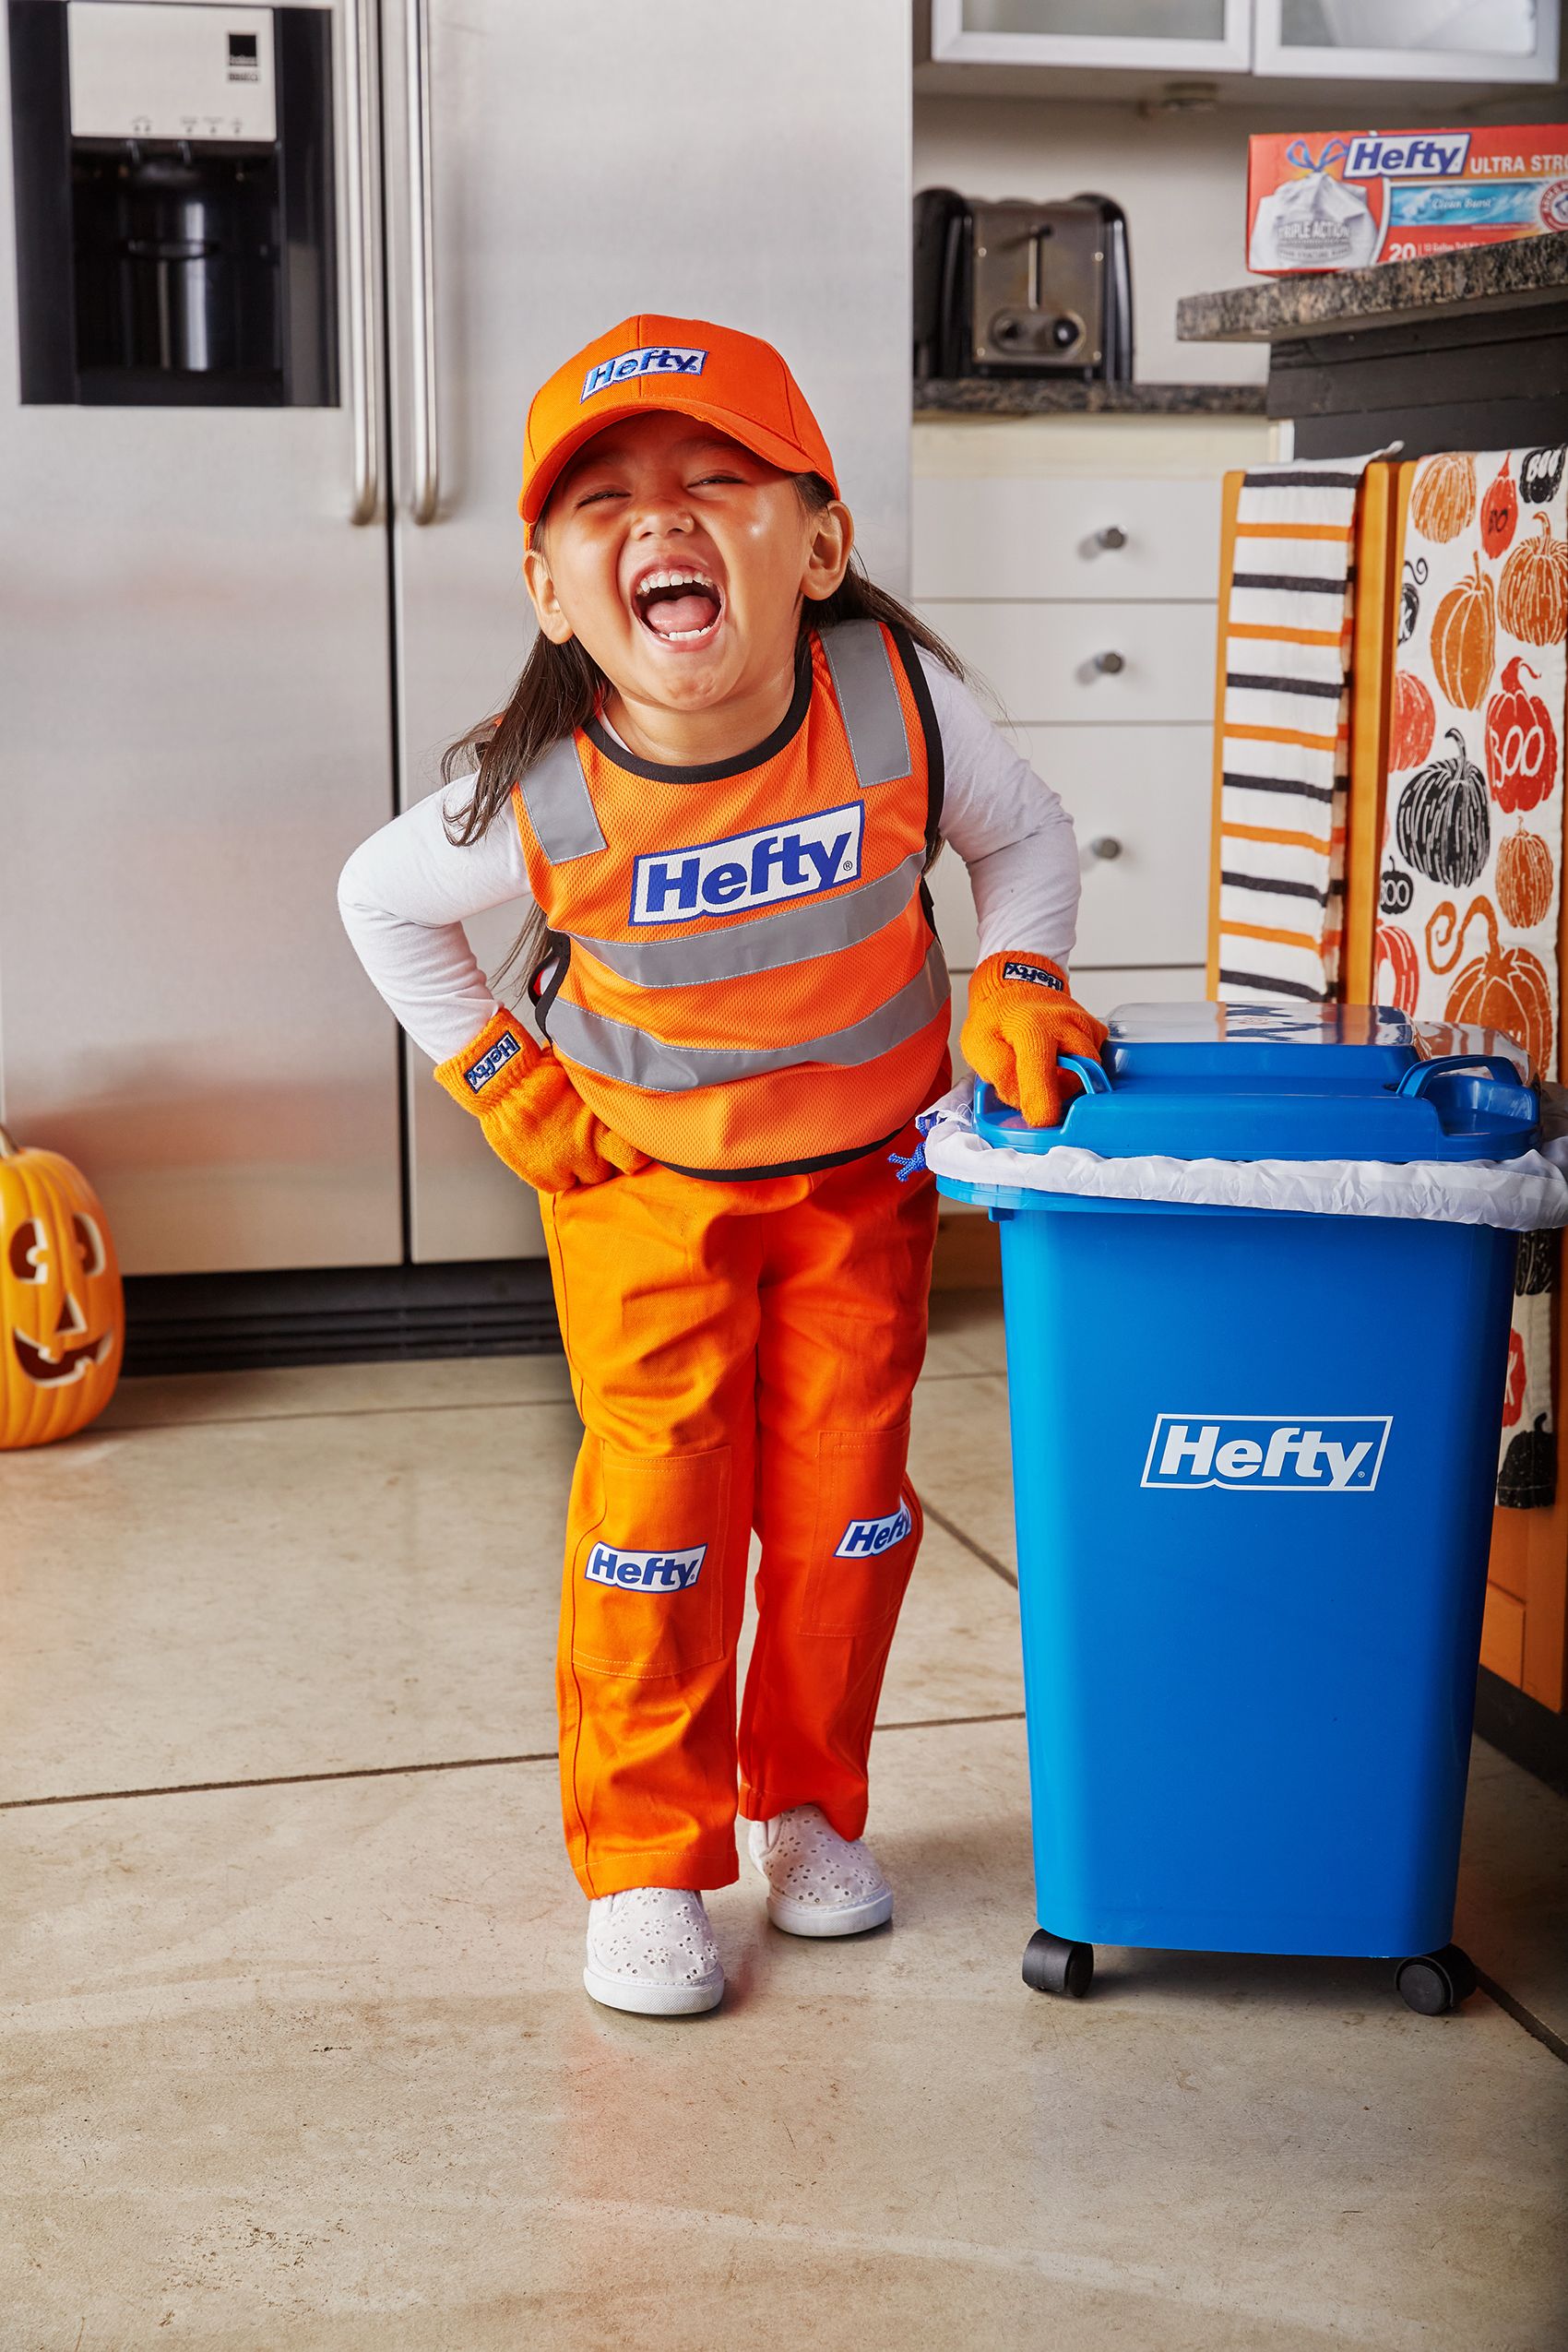 Buy Garbage Collector Halloween Costume For $5 - Simplemost White Trash Halloween Costume Garbage Bag